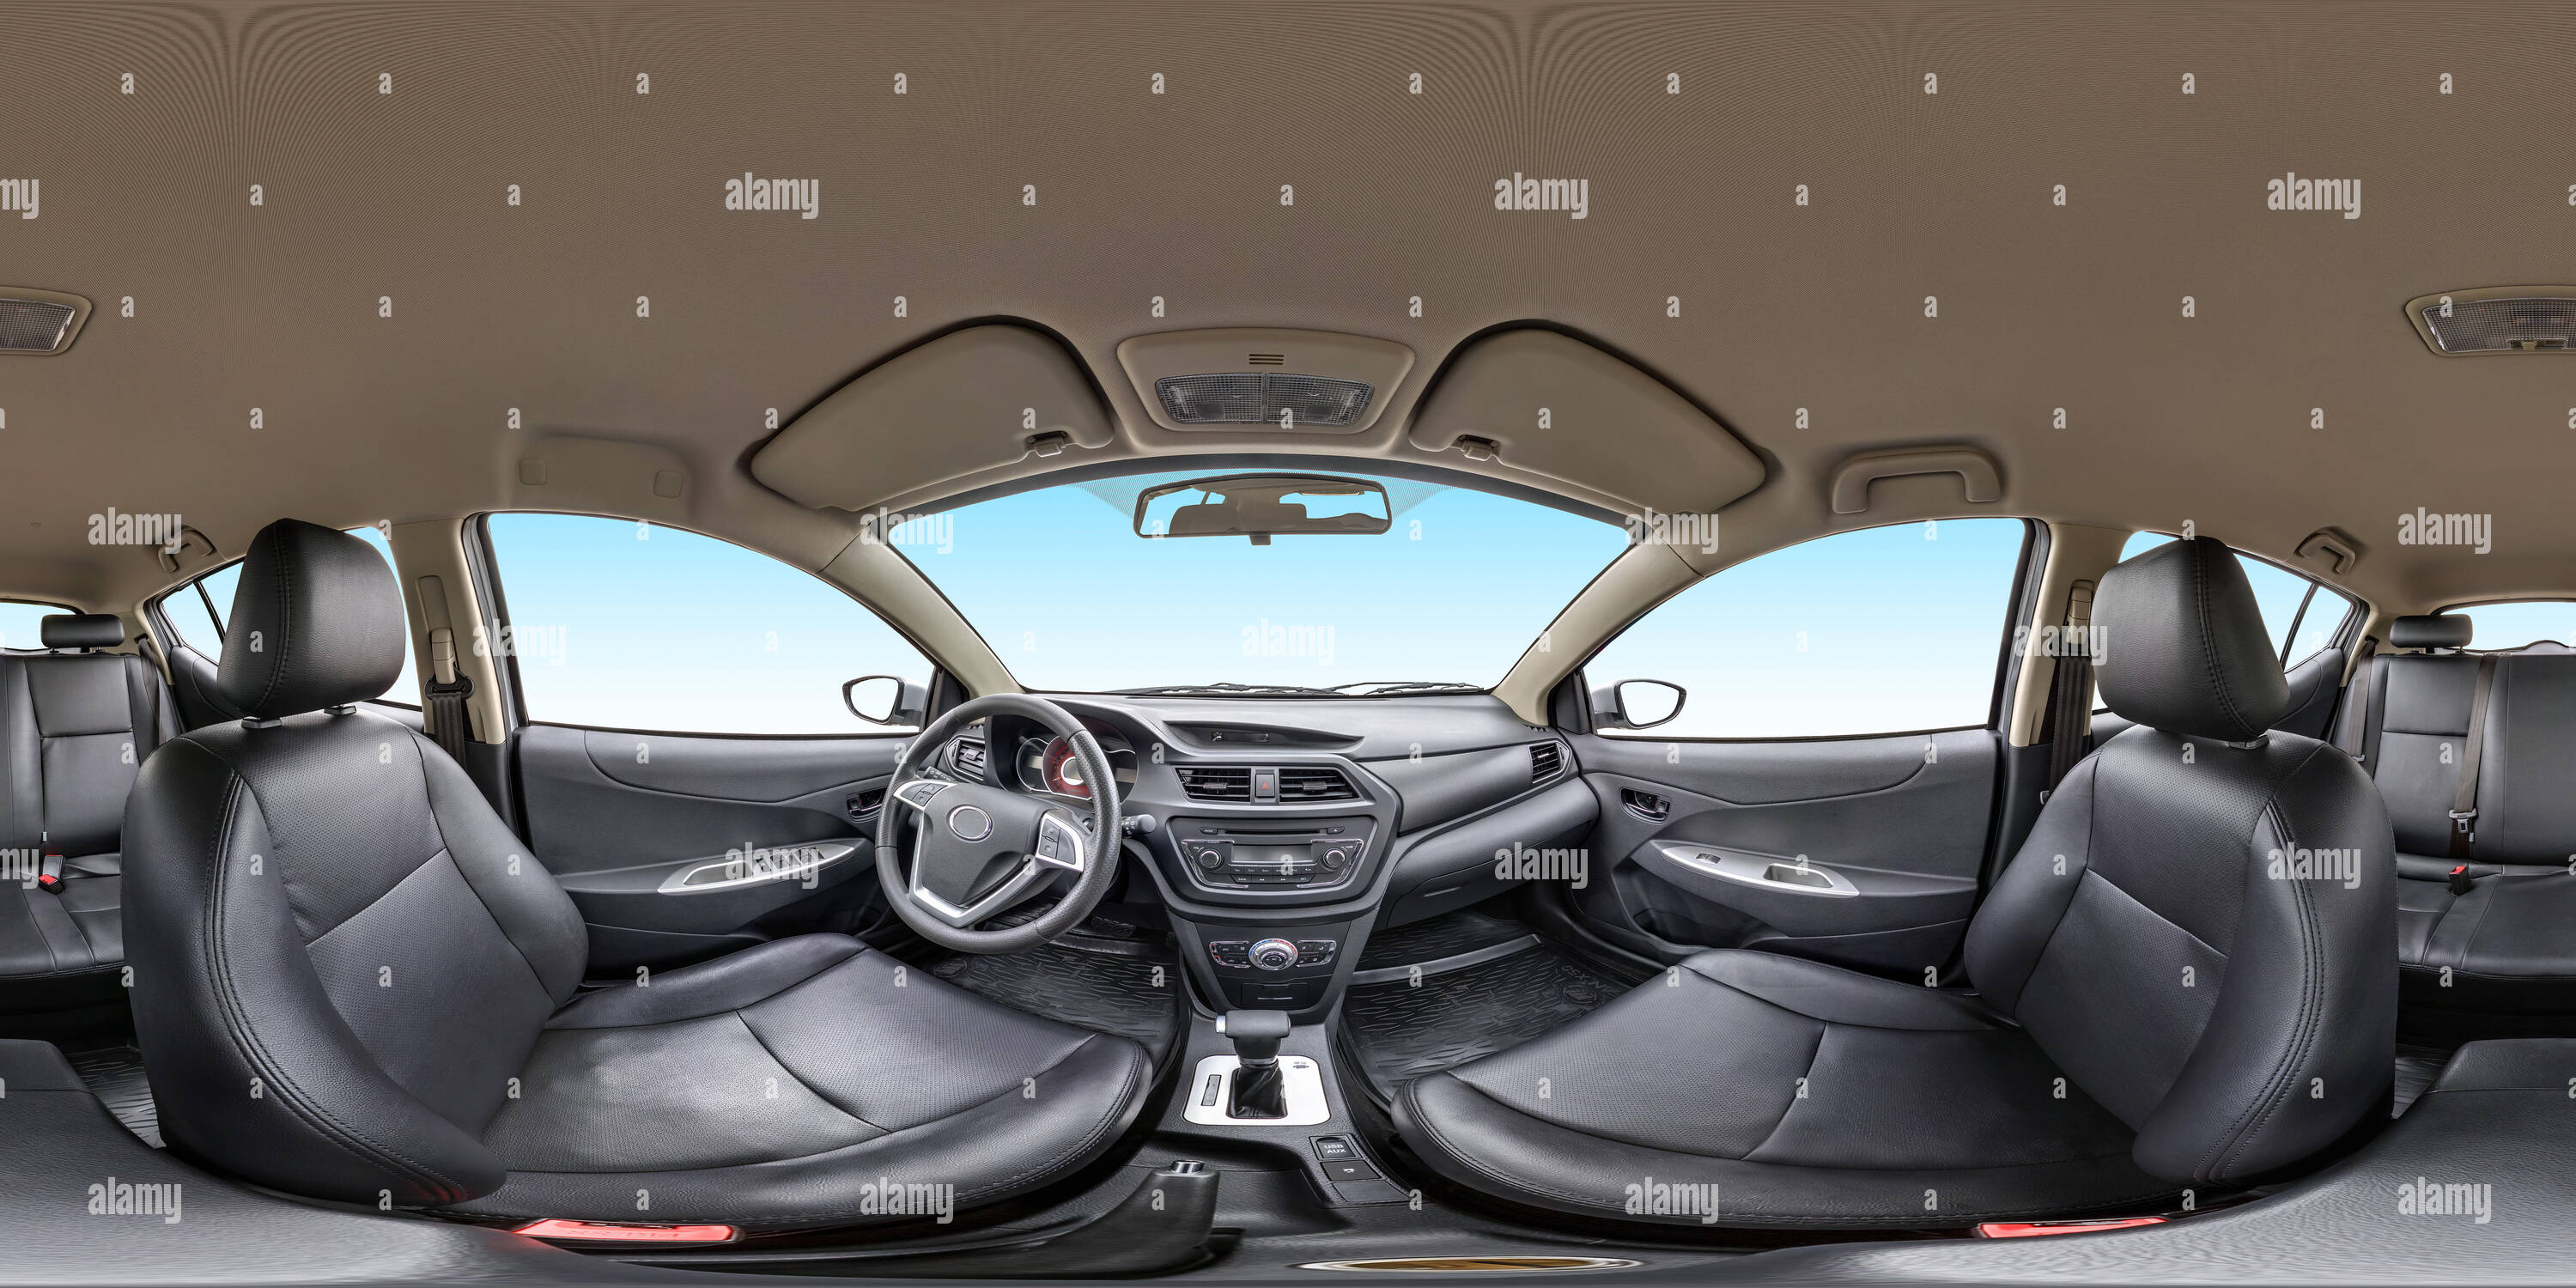 360 degree panoramic view of 360 angle panorama view in interior salon of prestige modern car. Full 360 by 180 degrees seamless equirectangula